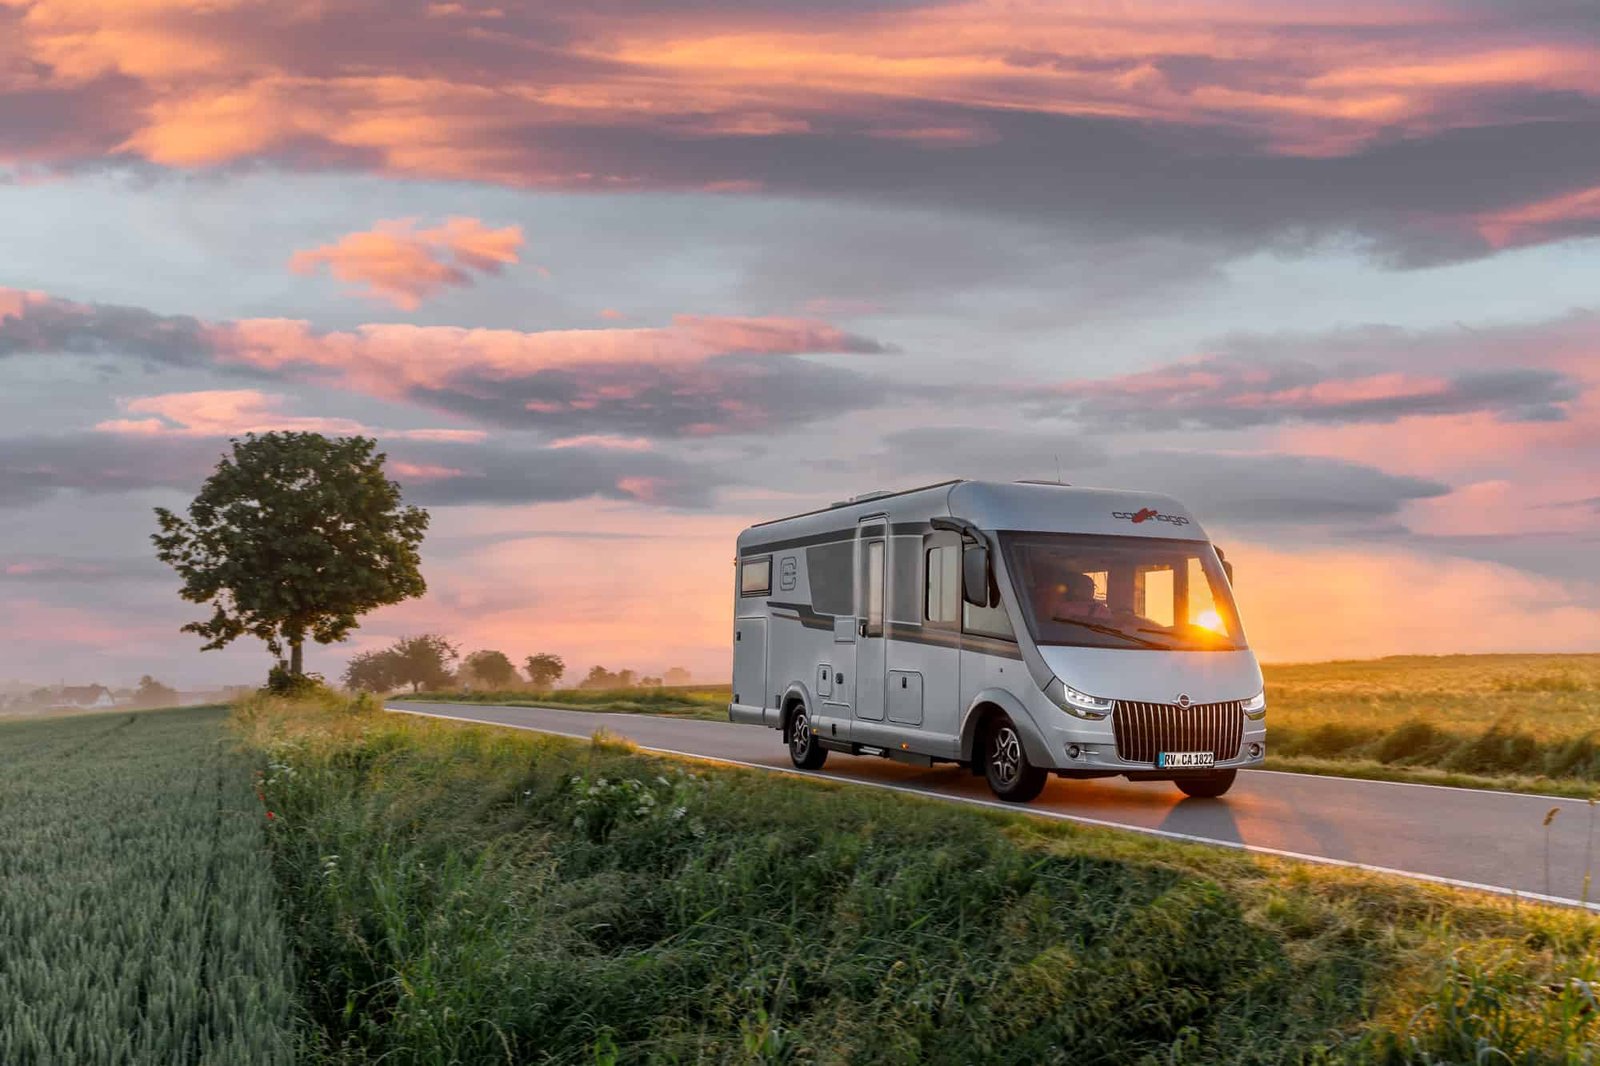 An RV is driving down a country road at sunset, showcasing the class and elegance of this recreational vehicle.